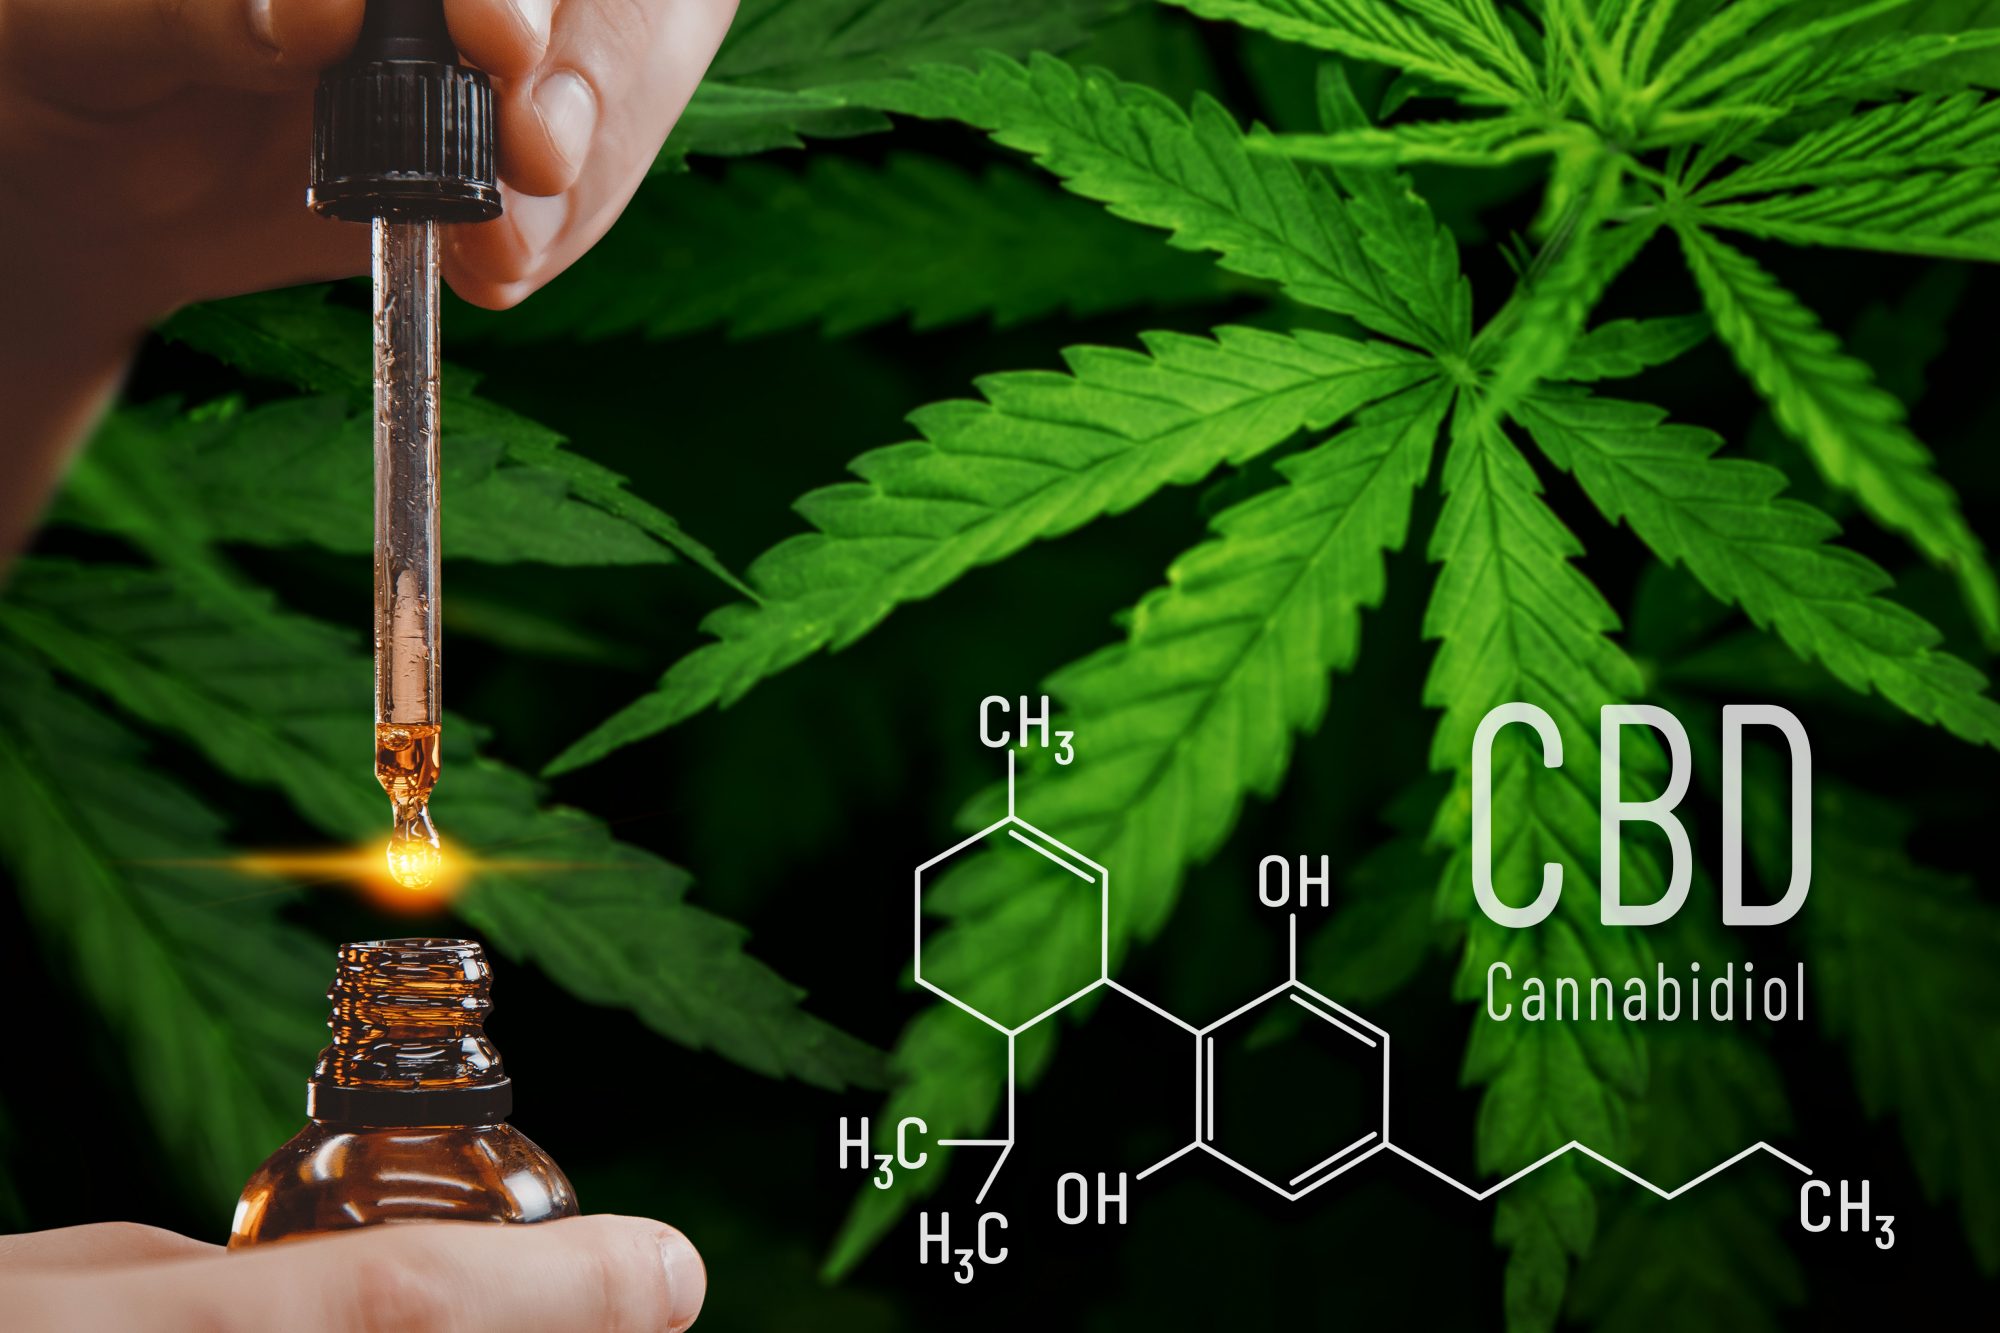 What is CBD? This cannabis ingredient is on the rise for wellness